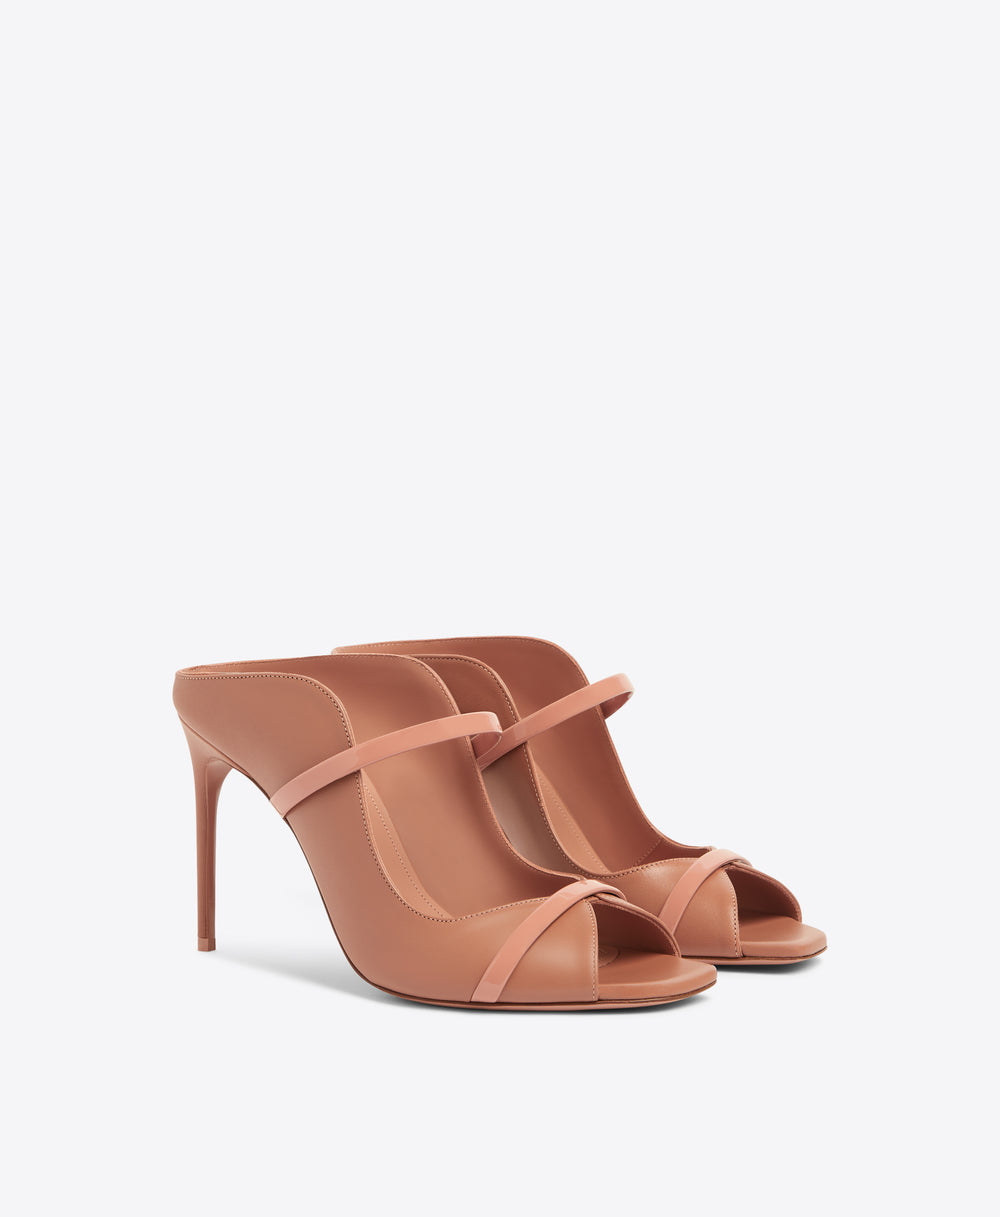 Noah 90 Sepia Leather Heeled Sandals Malone Souliers